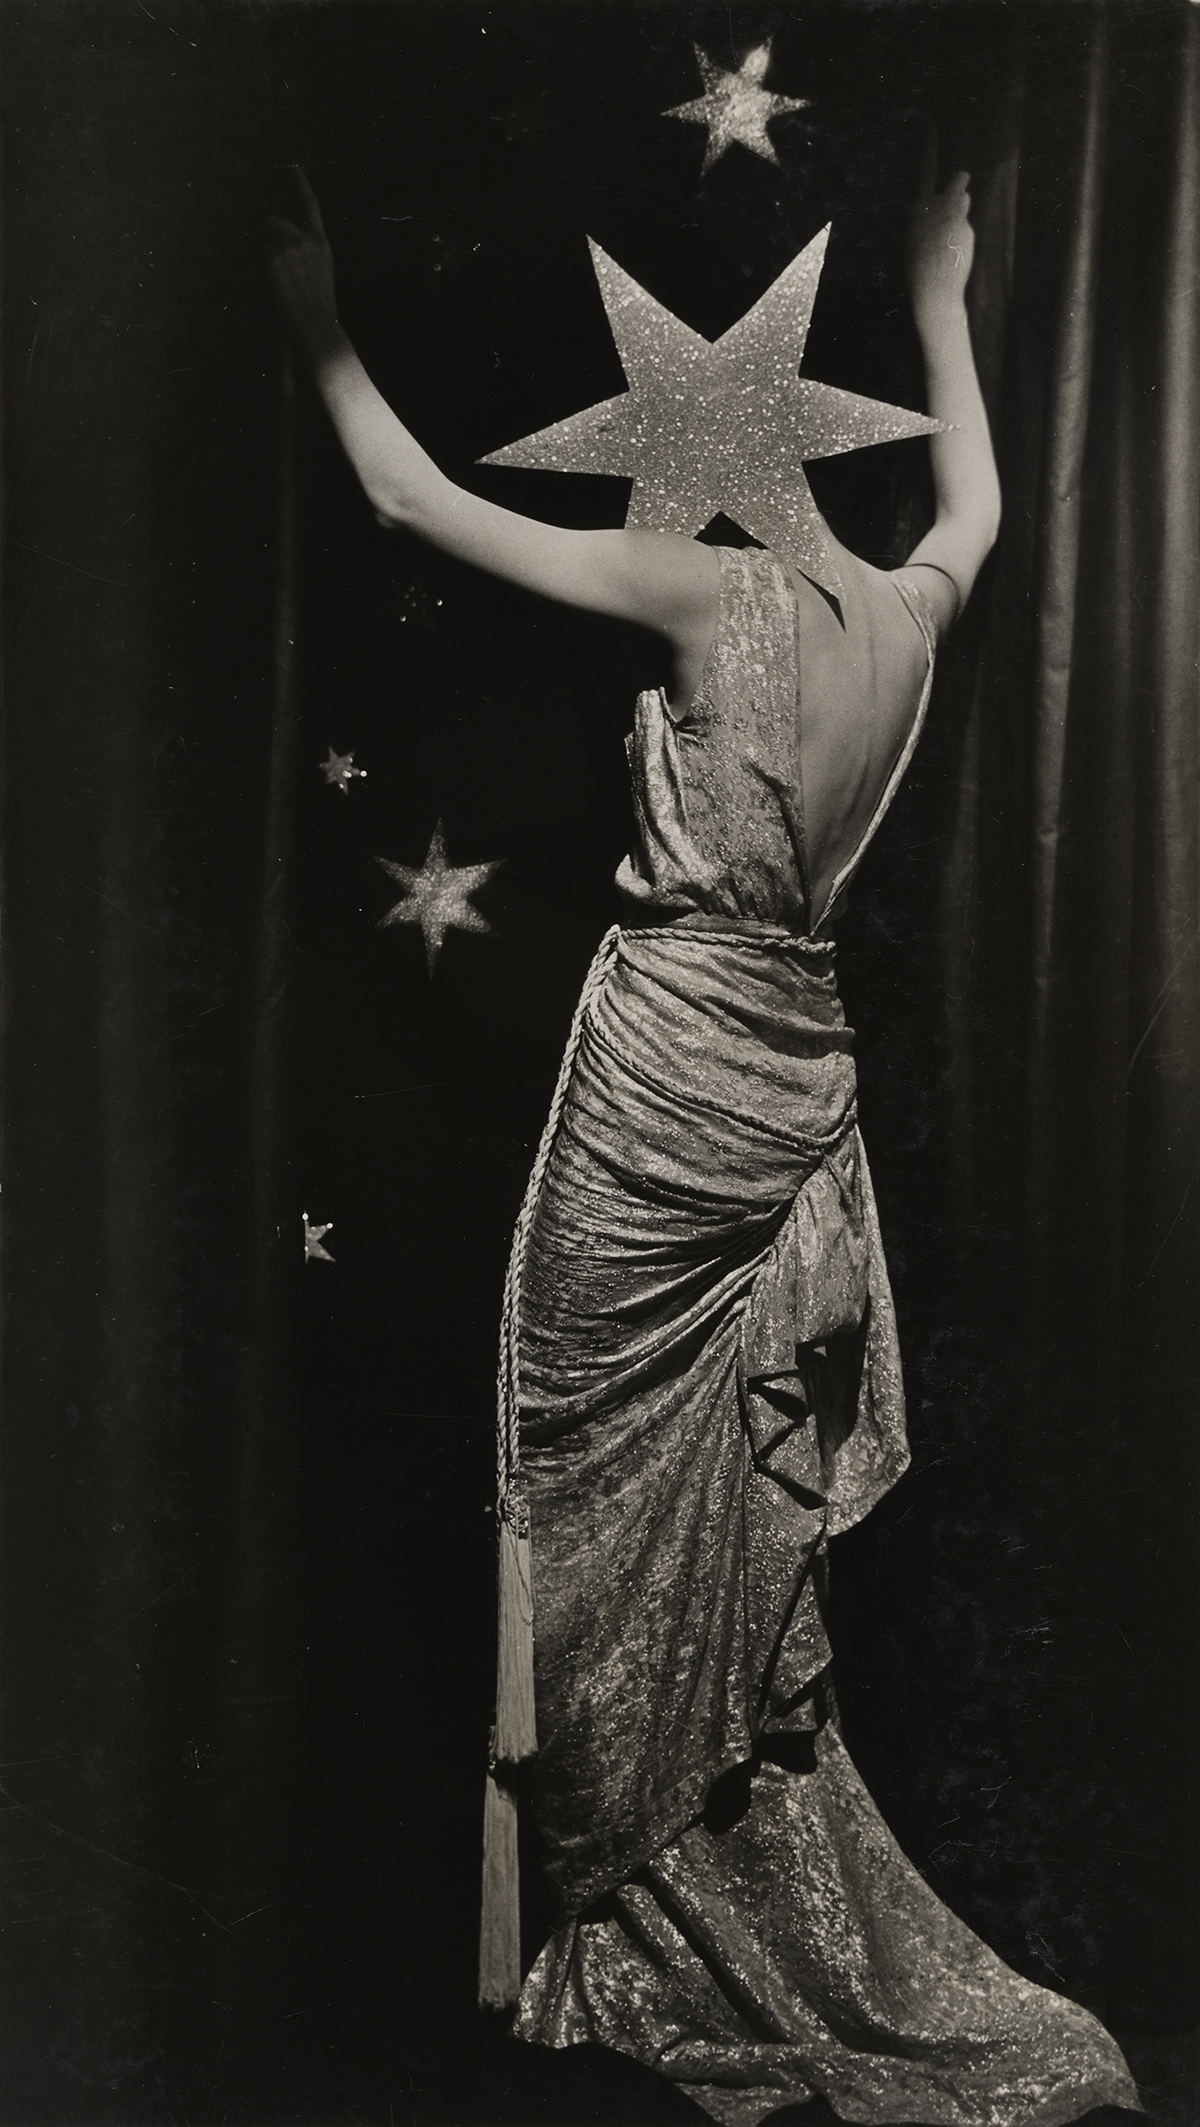 Surreal photograph of a woman with a star for a head